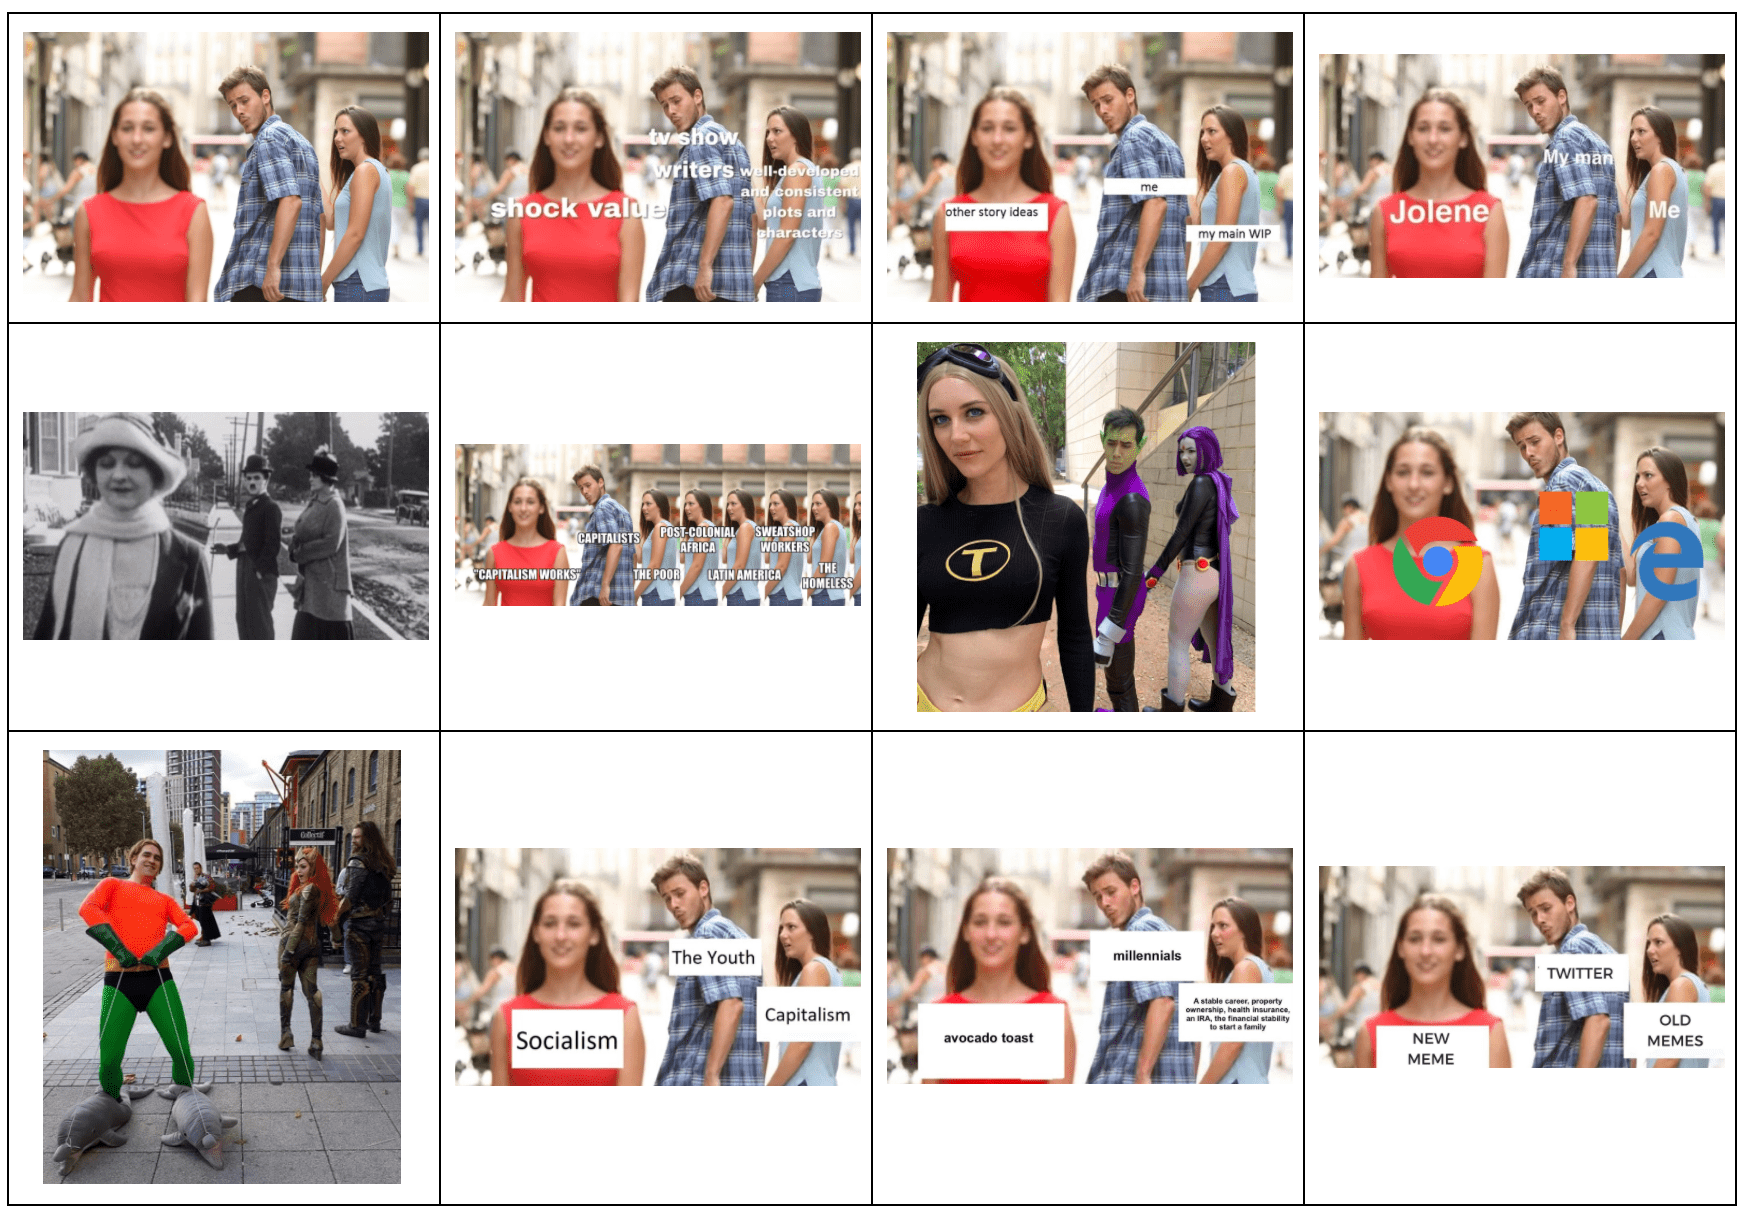 A table with 3 rows and 4 columns containing an image in each cell. The images are different remixes, or versions, of the Distracted Boyfriend meme. This meme is based on a stock photo containing three people. In the stock photo, a woman in a red dress is walking in the direction of the camera on the far left side of the image. A man in a blue plaid shirt is in the center of the image walking the opposite direction but is turning to look at the back of the woman in the red dress. Another woman in a blue shirt is on the far right side of the image, holding hands with the man, and looking at him with an irritated, shocked look. The facial expressions represent the man being more interested in the woman on the left over the woman on the right. In remixes, the three people are covered with either texts or images, resulting in a comparison or judgement made by the man character about the two women characters. Some remixes recreate the original stock photo with other people or toys in the same positions as original figures.